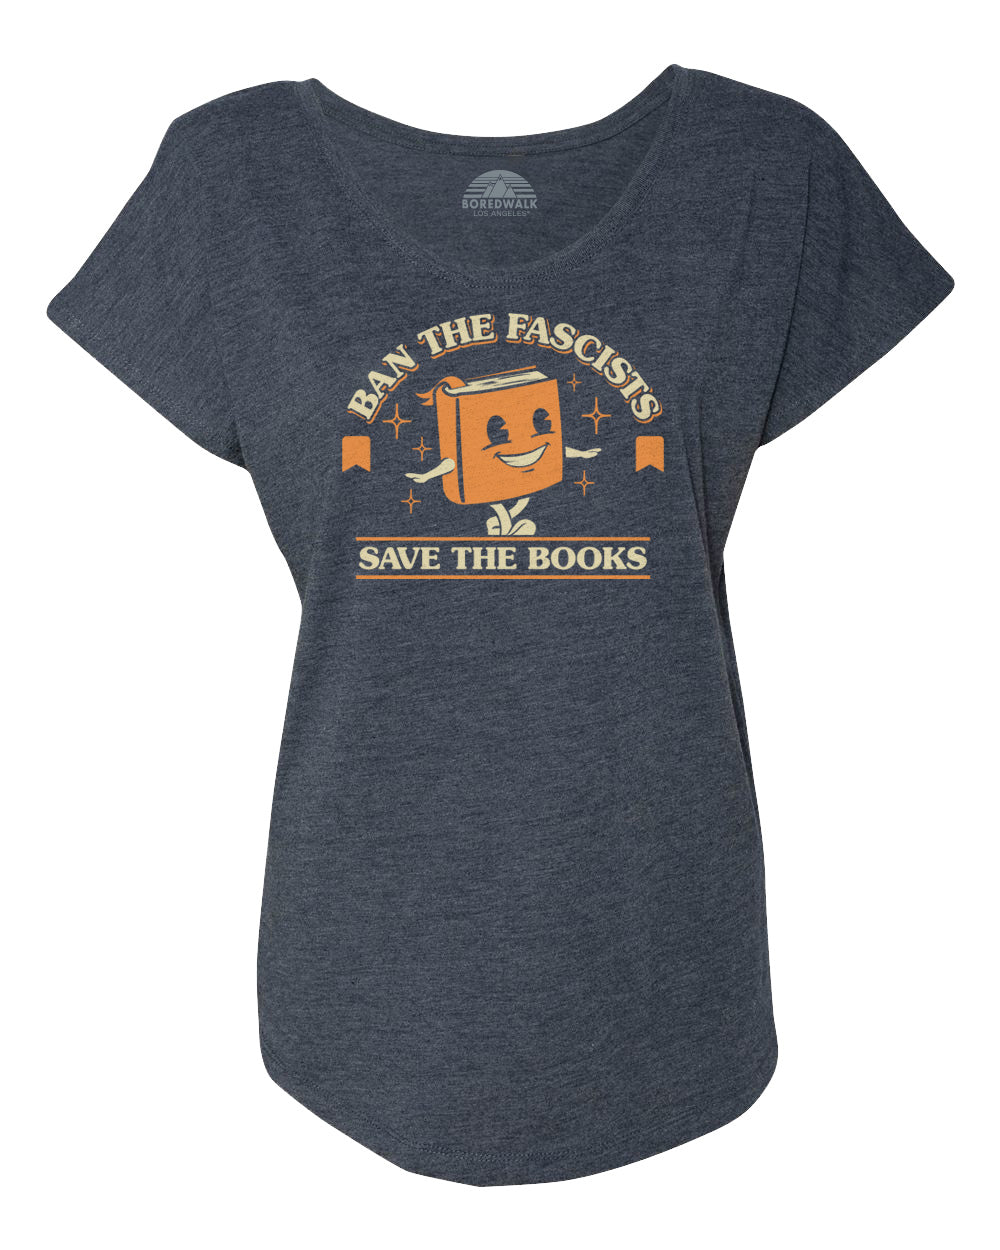 Women's Ban The Fascists Save The Books Scoop Neck T-Shirt